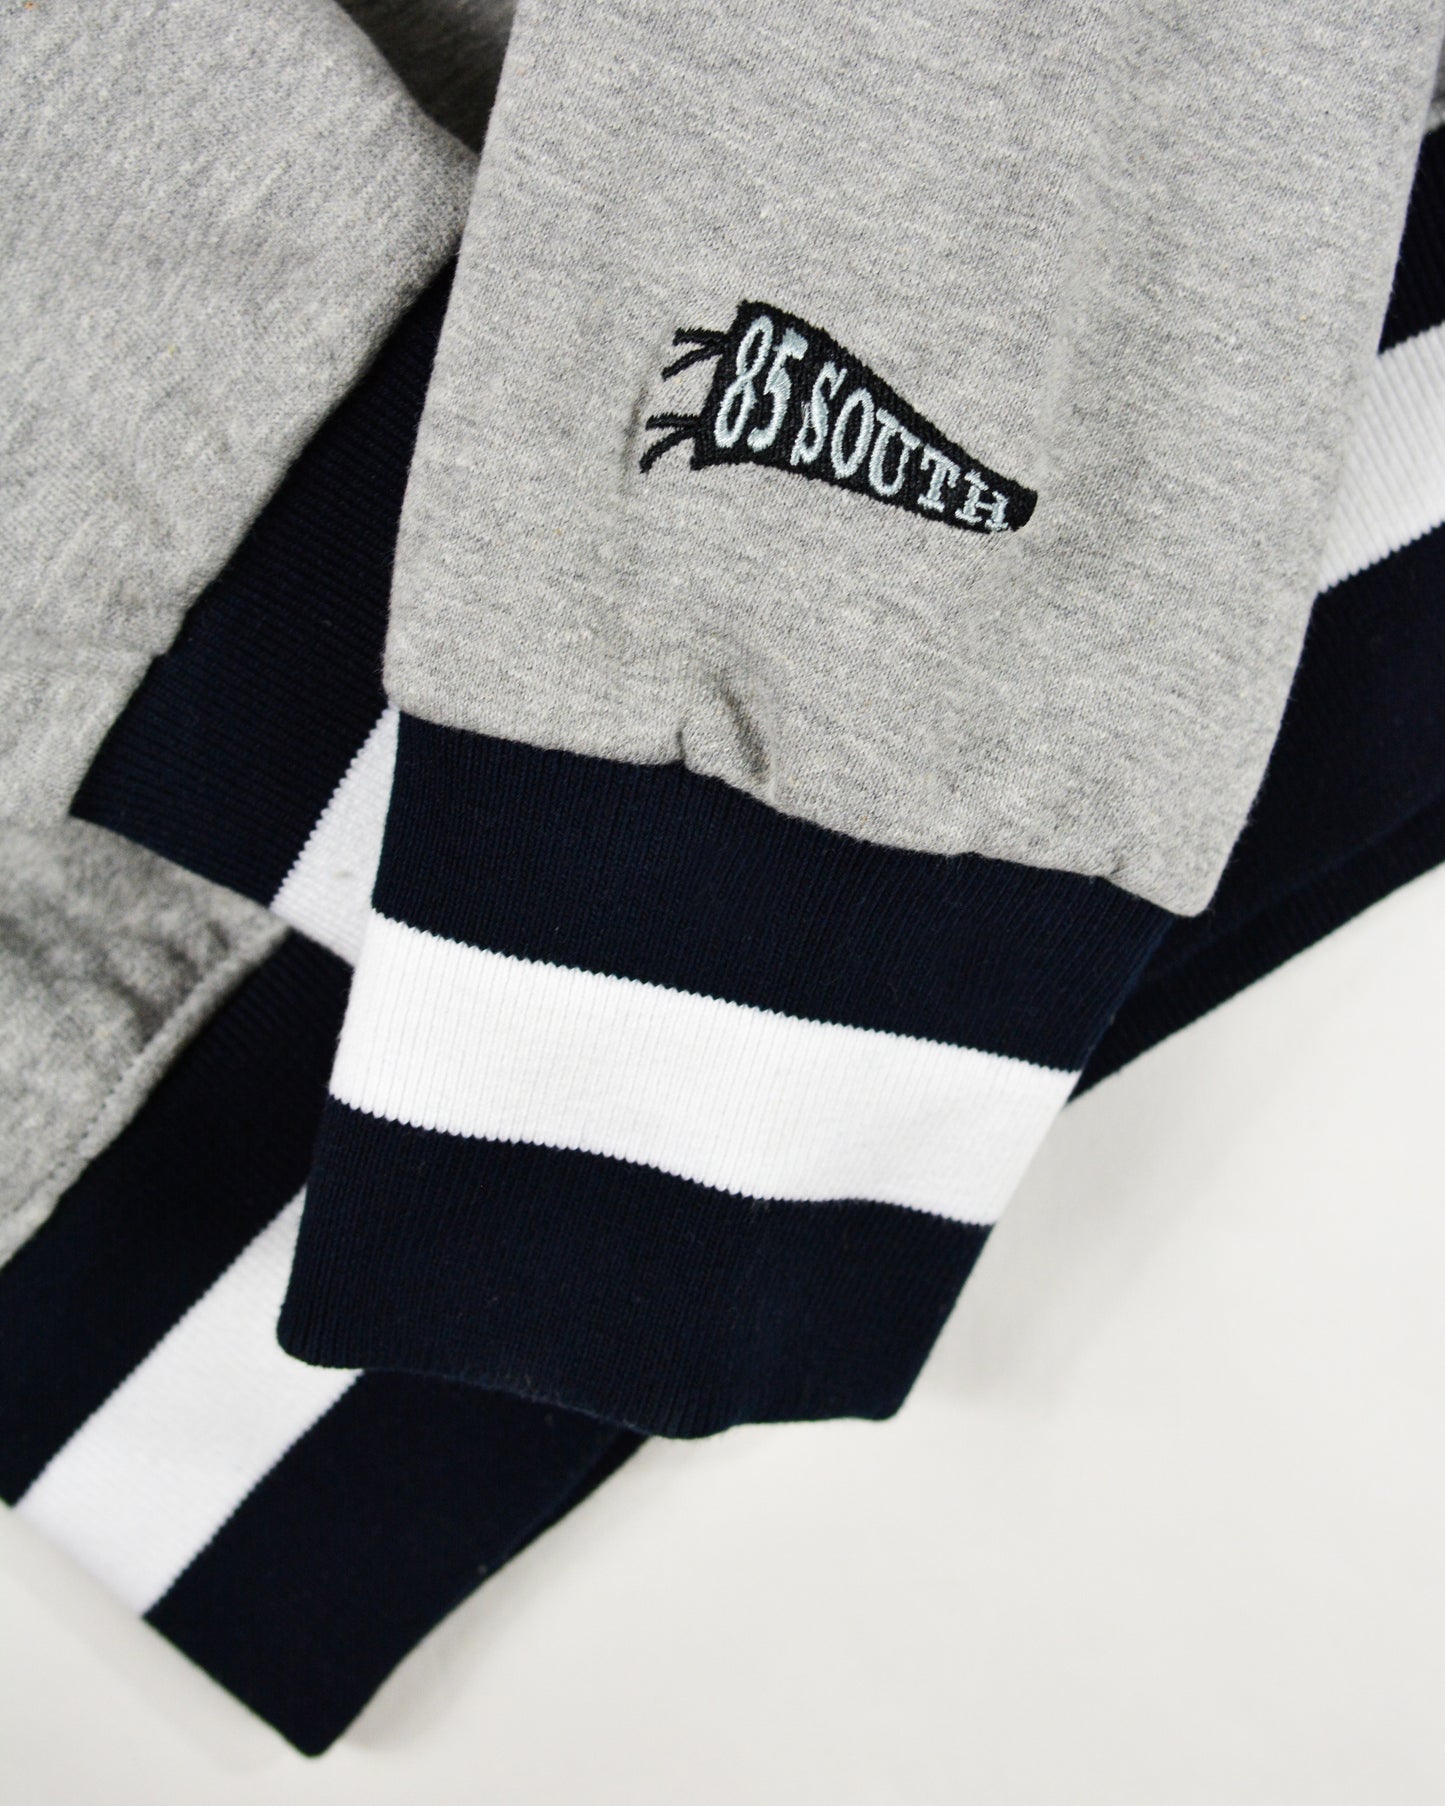 March Madness Hoodie - Heather Grey